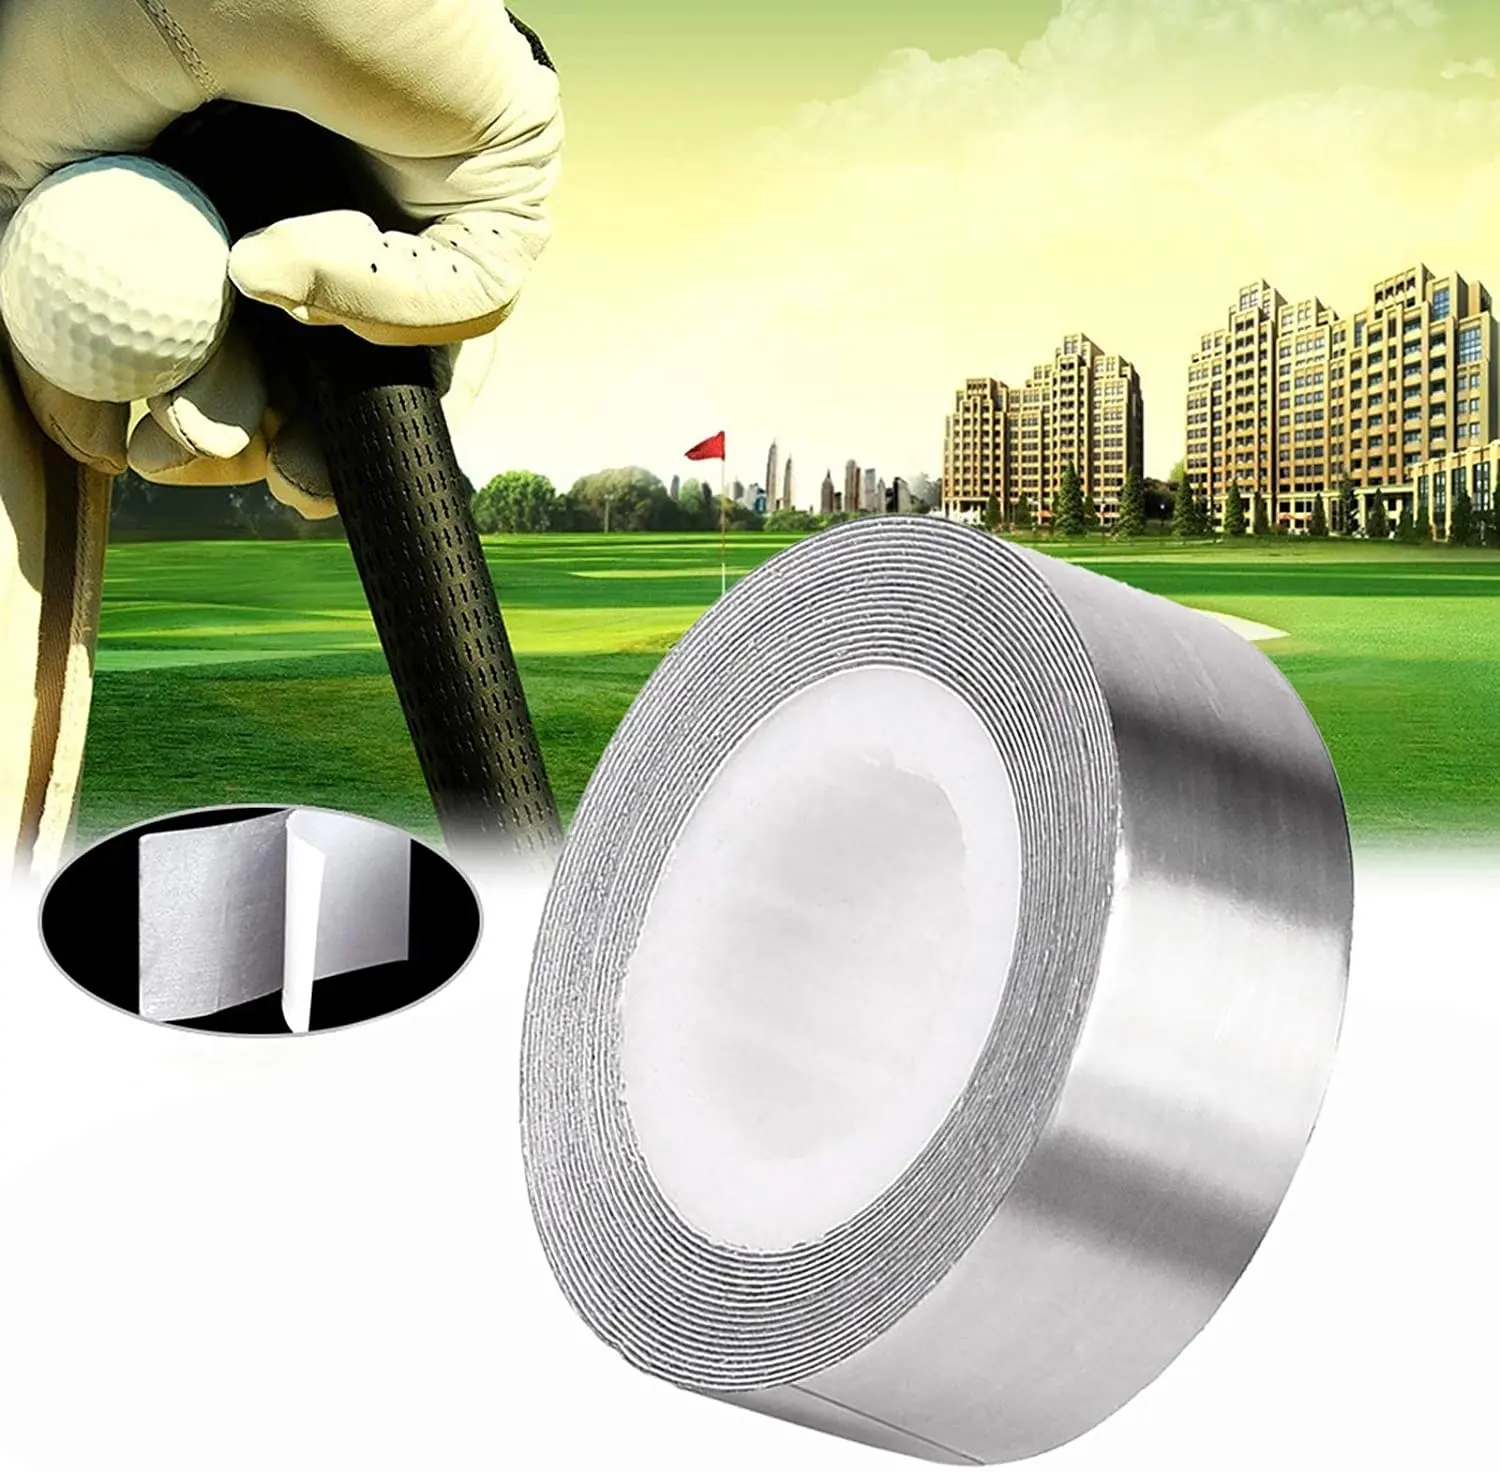 Hot Sales Golf High Density Lead Tape Weight Self-Adhesion Belt Weight Self-adhesive Driver Fairway Hybrid Iron Clubs Head